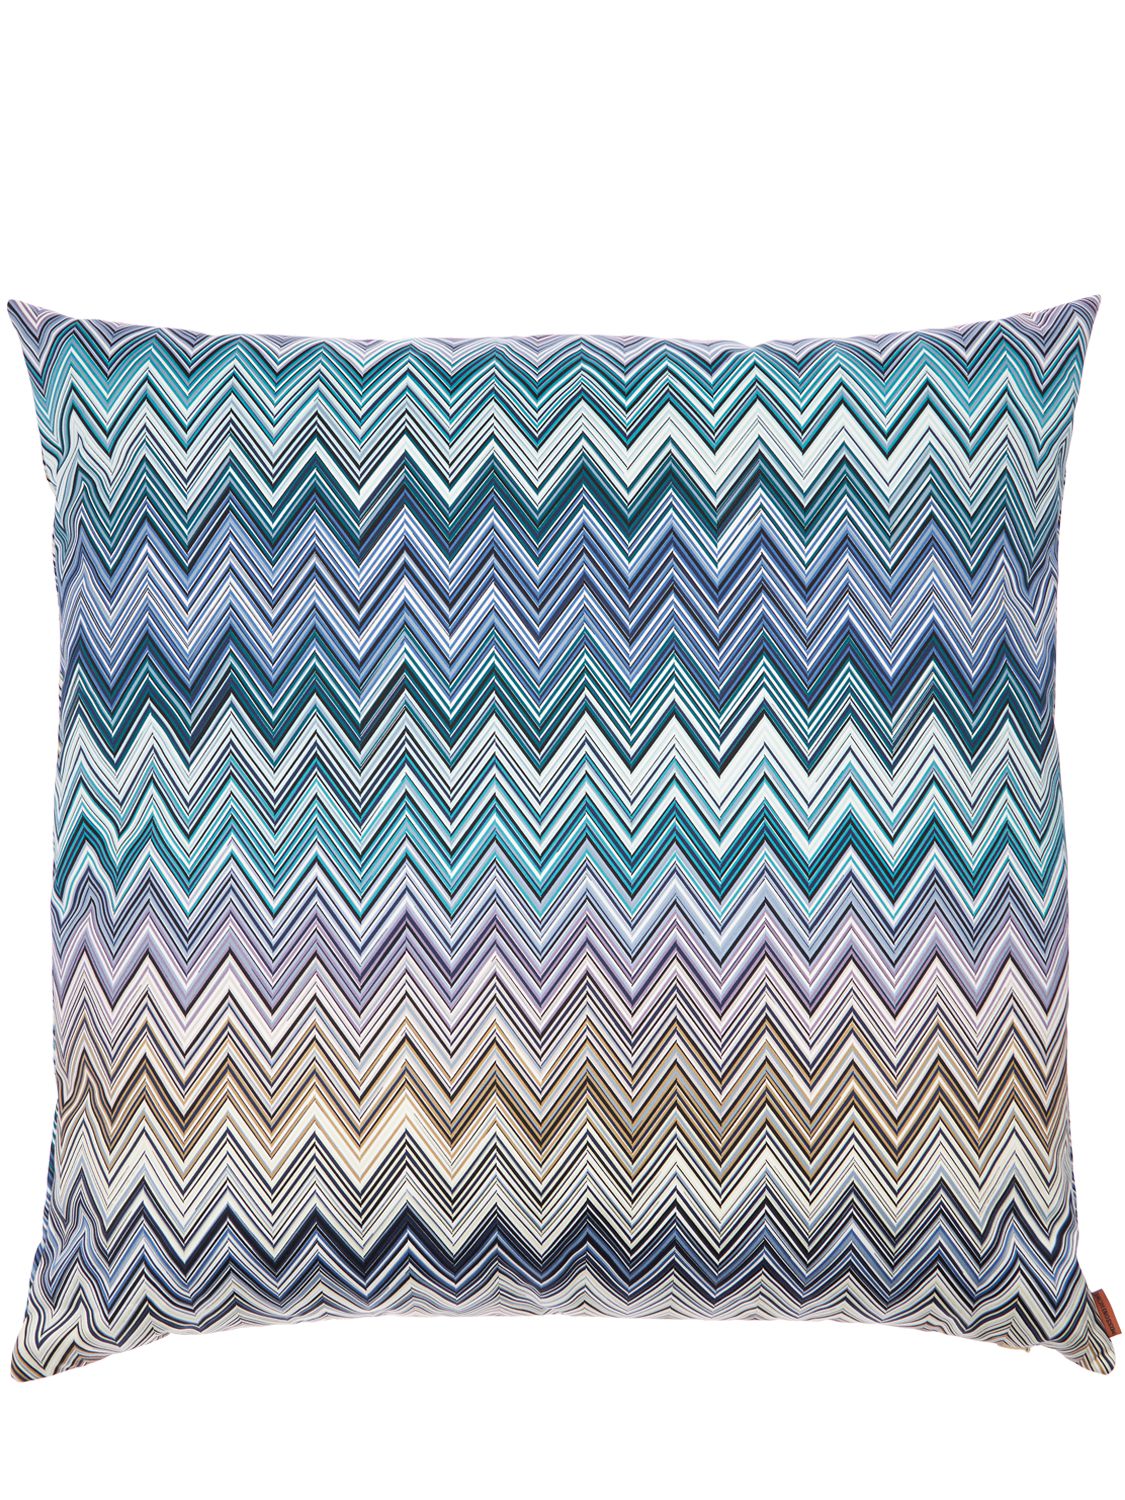 Missoni Home Collection Jarris Cushion In Multicolor